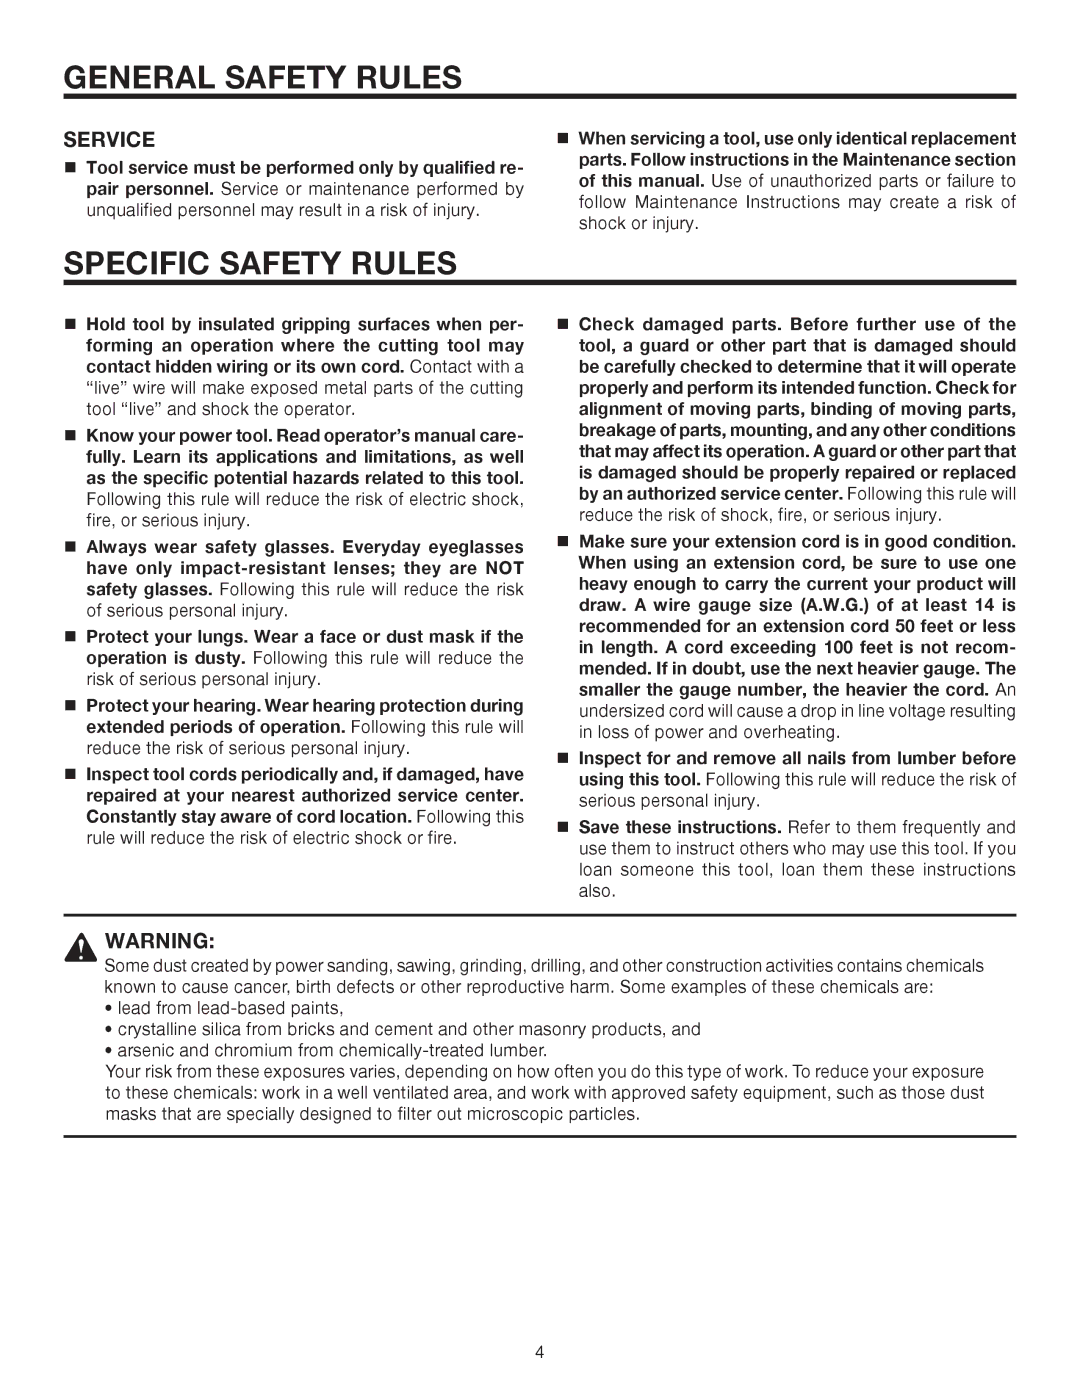 RIDGID R6300 manual Specific Safety Rules, Service 